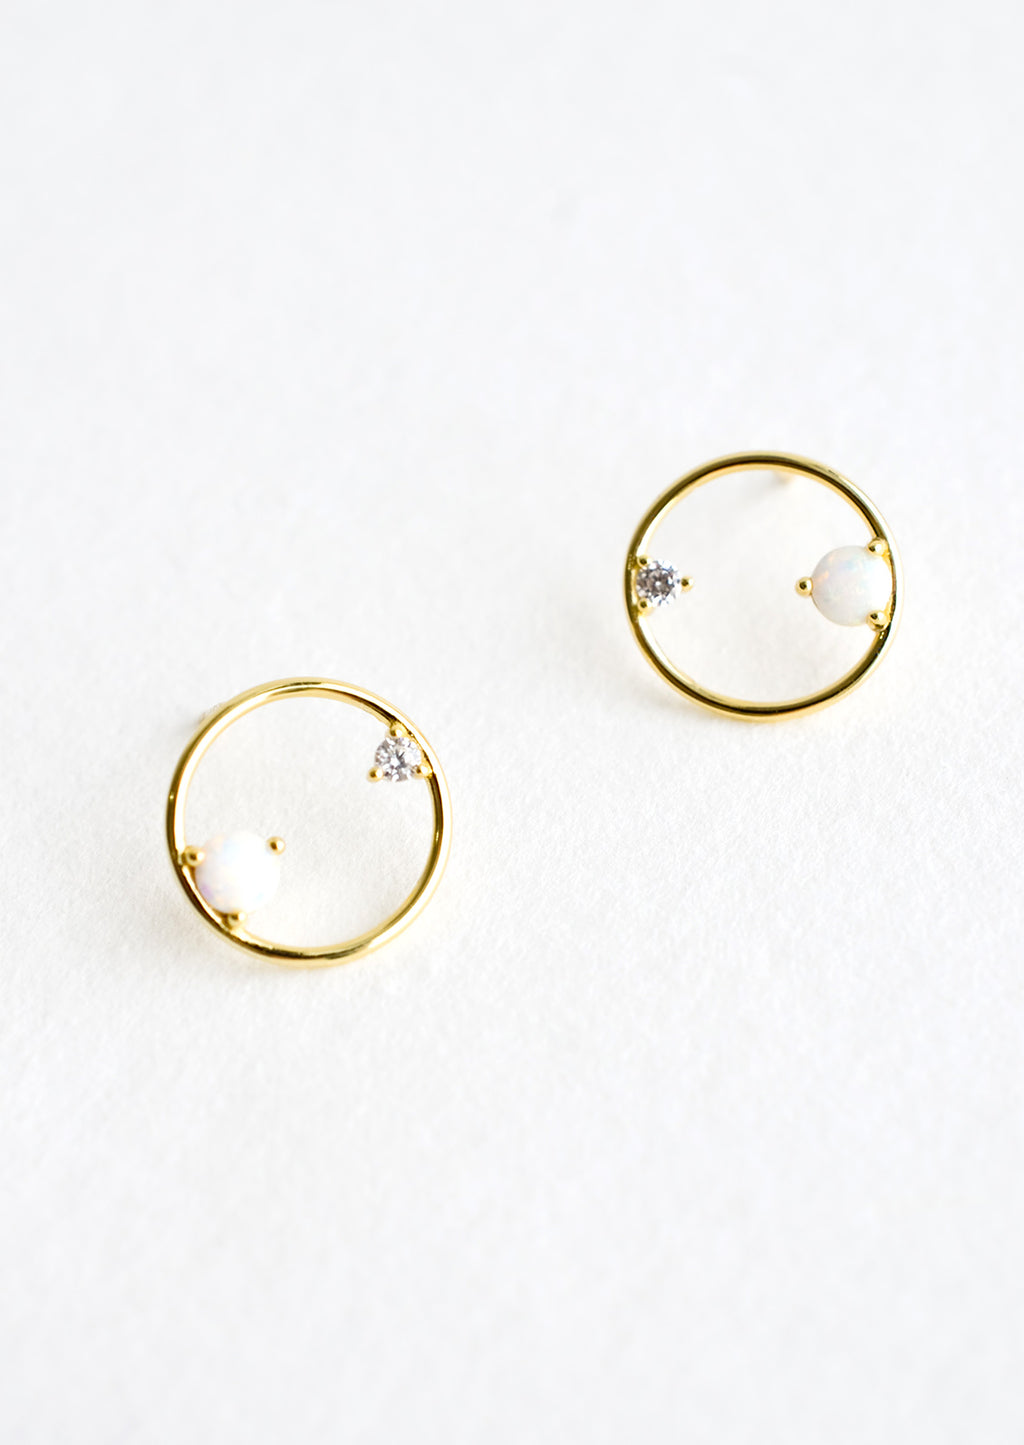 2: A pair of gold stud earrings in the shape of a circle with opal and crystal detailing.